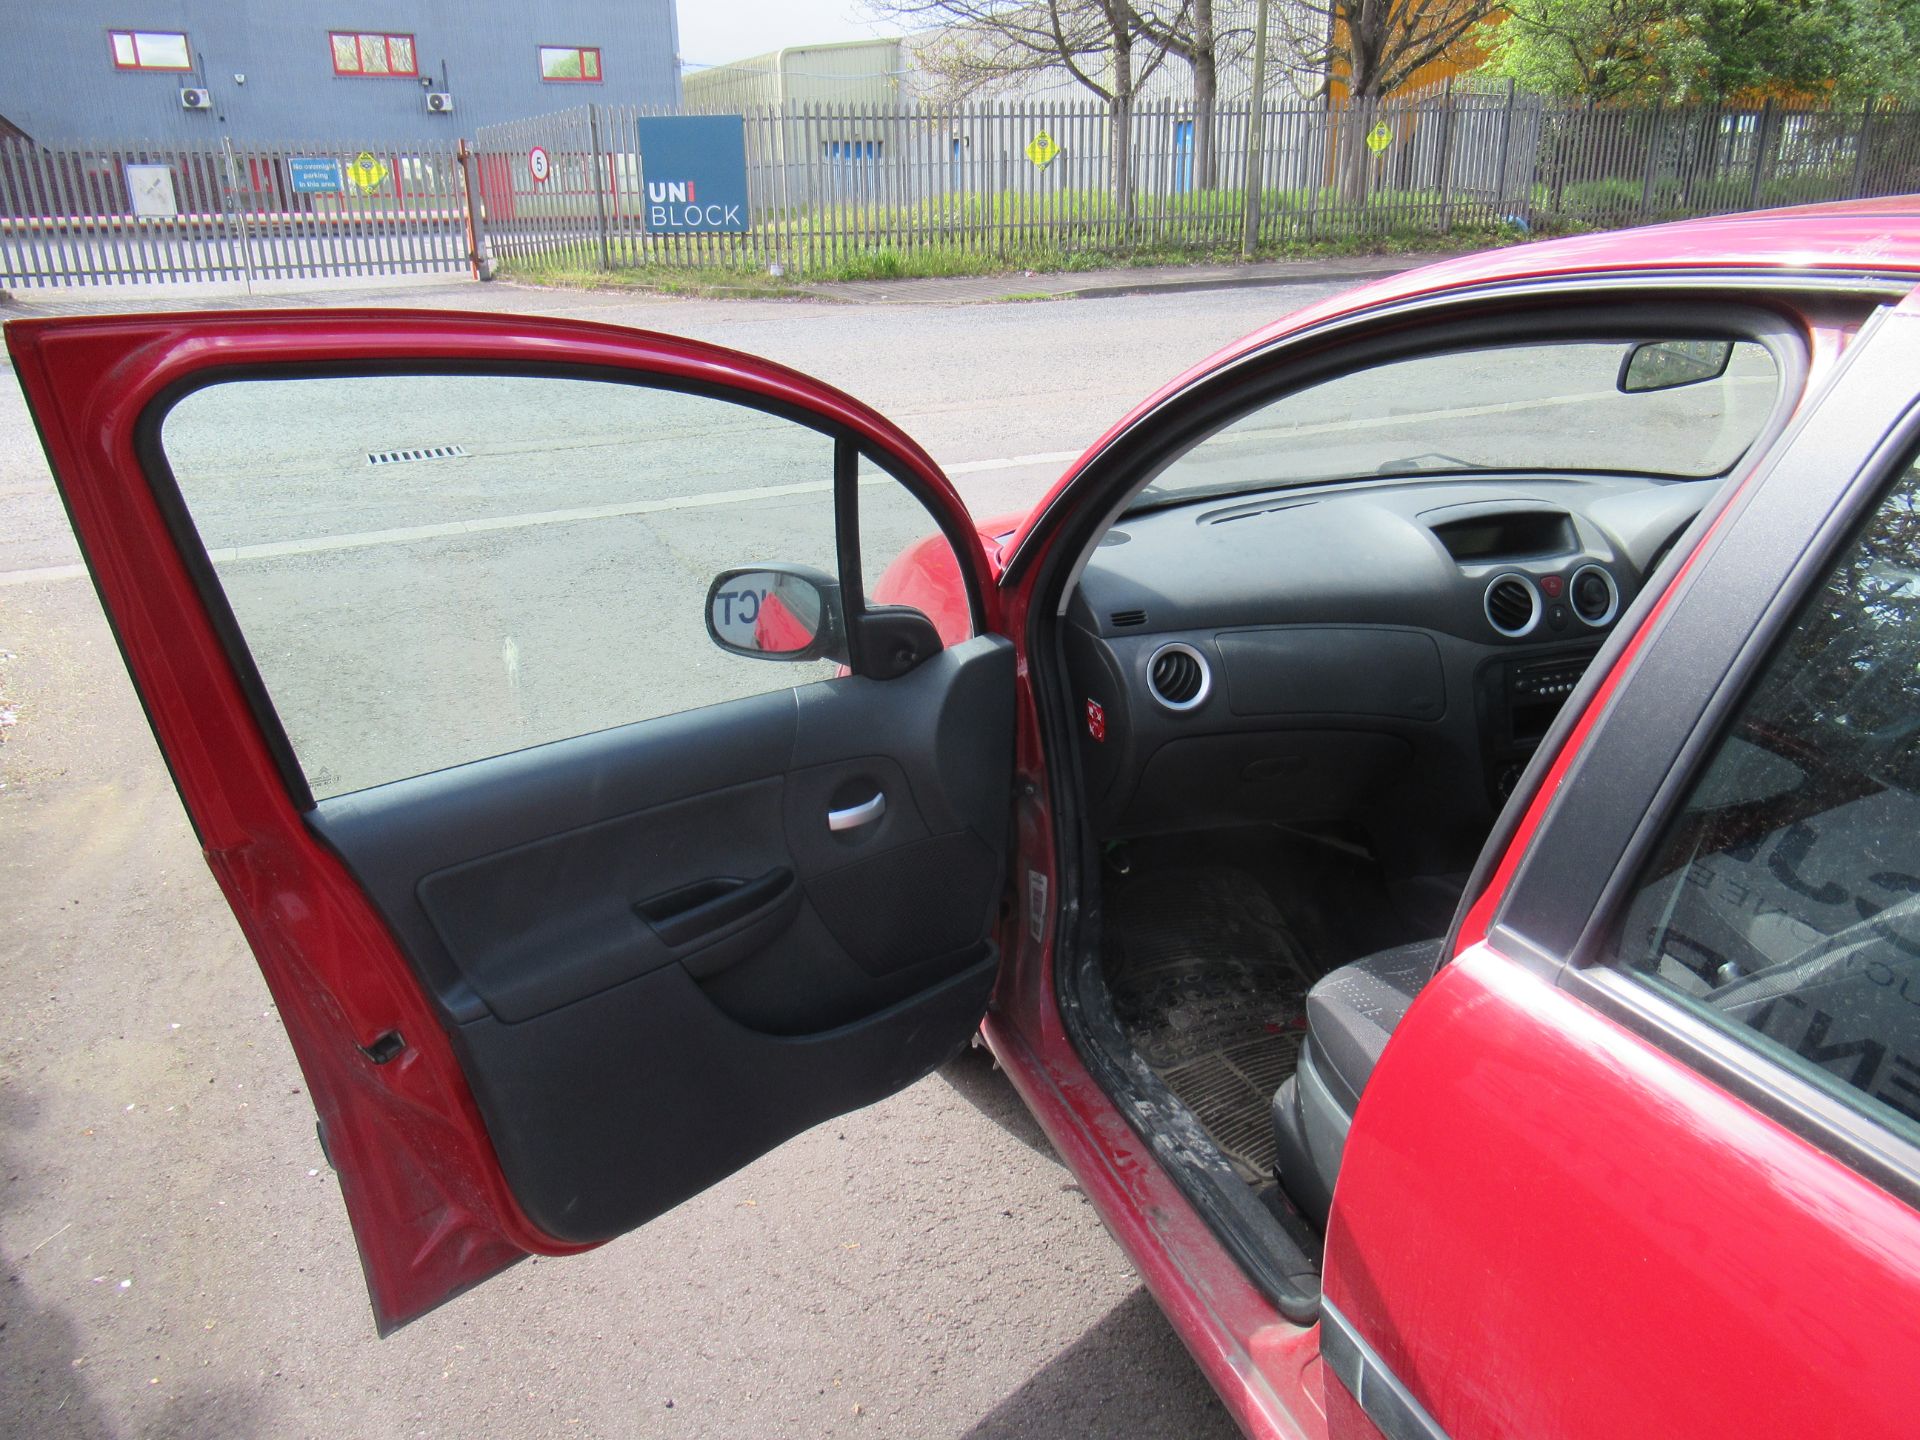 2008 RED CITROEN C3 VIBE - Image 30 of 40